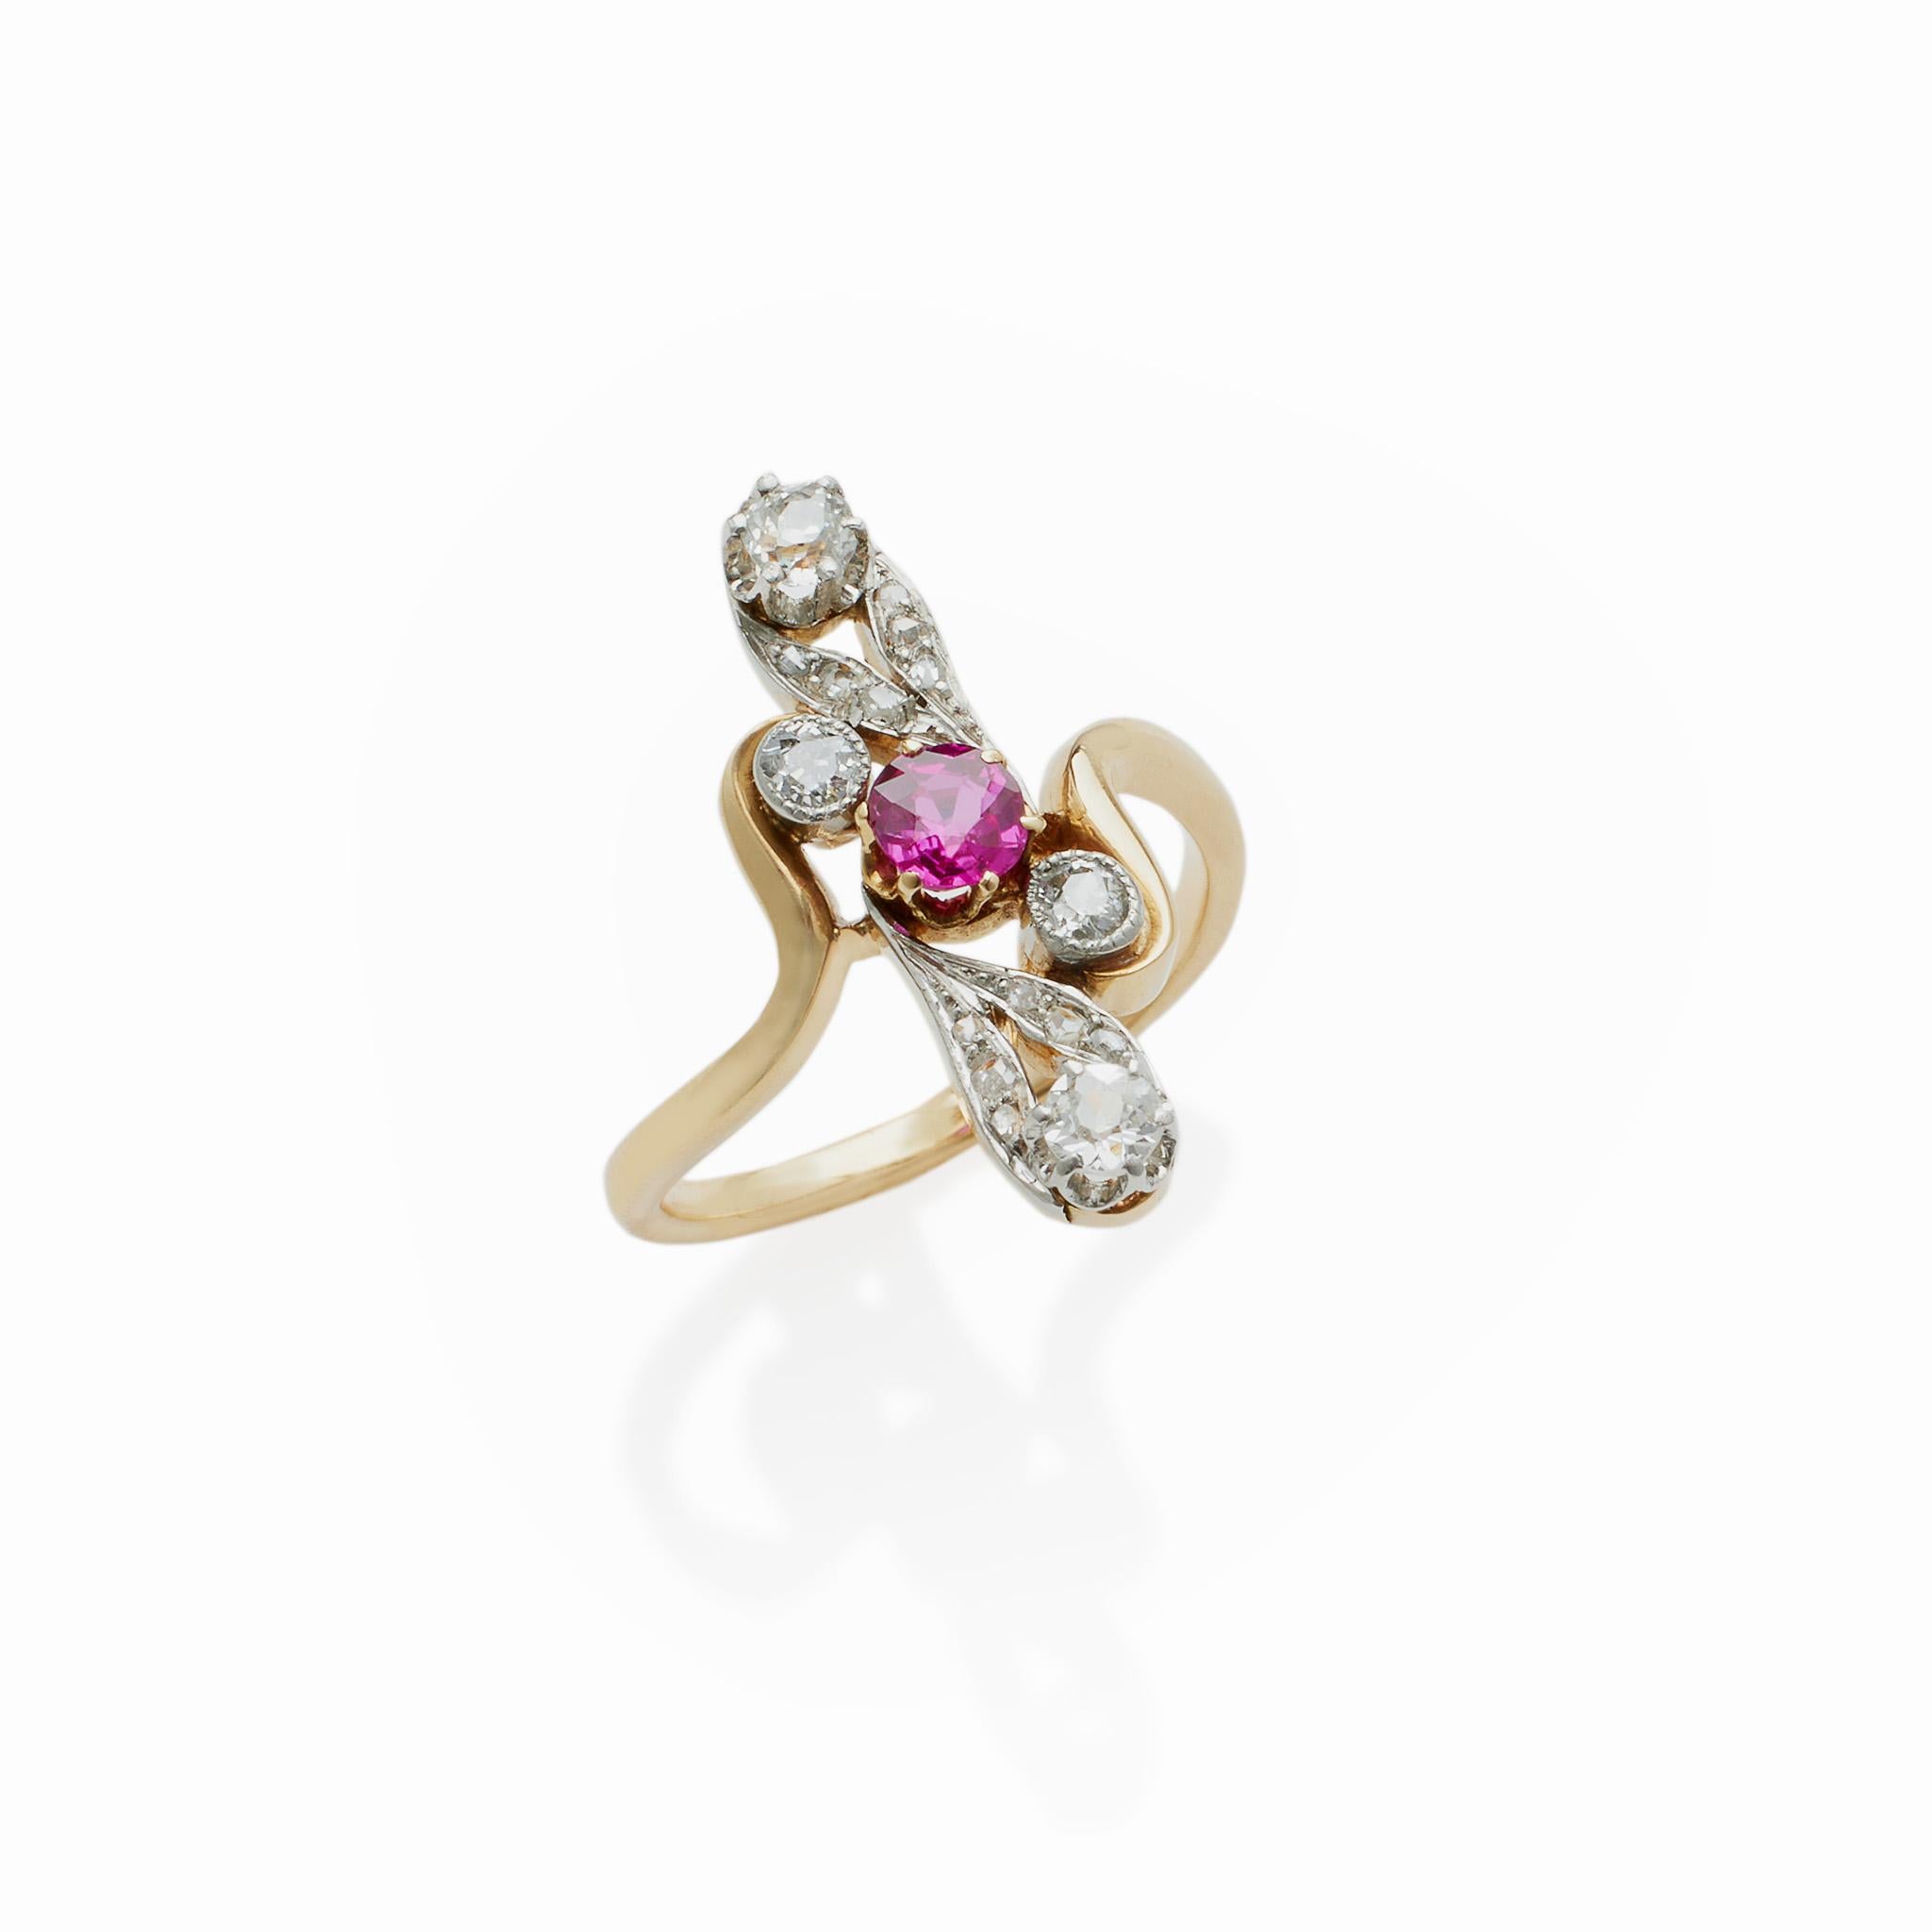 This French ruby and diamond ring in platinum-topped 18K gold dates from circa 1910. The slender form centers a ruby surrounded by swirling gold vines and a pair of stylized old European and rose-cut diamond blossoms. The graceful form, imbued with